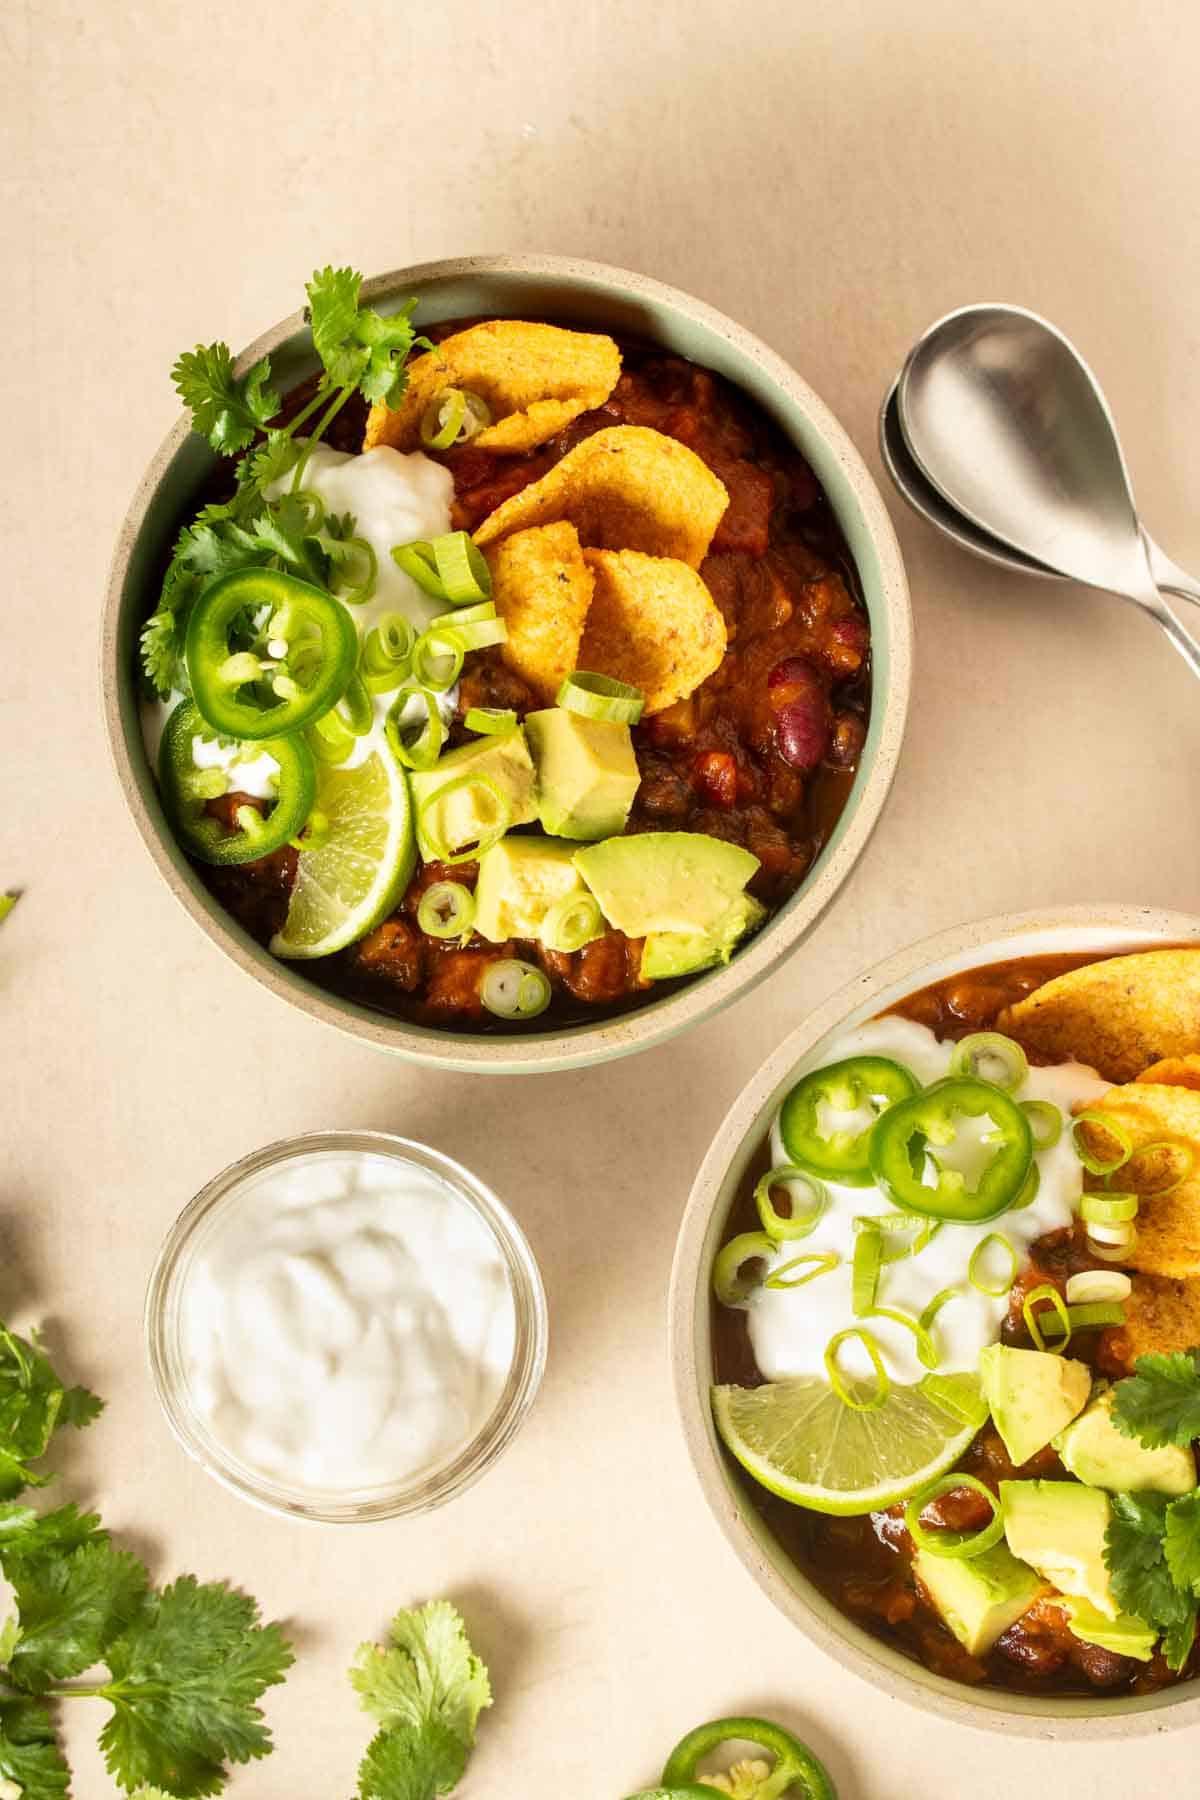 Two bowls of chili topped with ingredients like corn chips and avocado with spoons and more ingredients next to them.